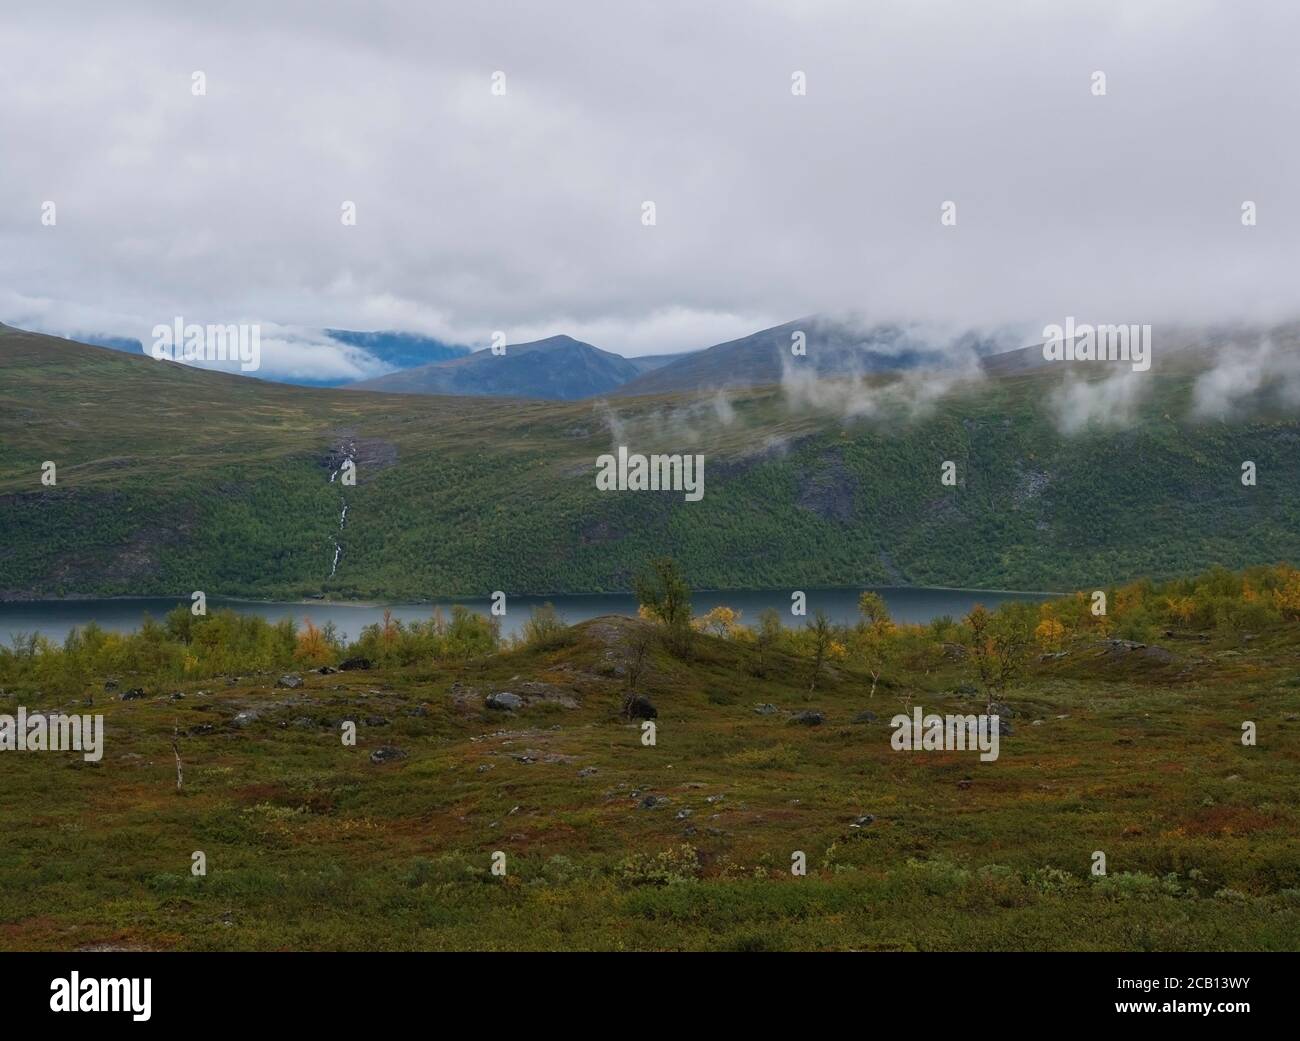 Lapland nature at Kungsleden hiking trail with green mountains, Teusajaure lake, rock boulders, autumn colored bushes, birch tree and heath in mist Stock Photo